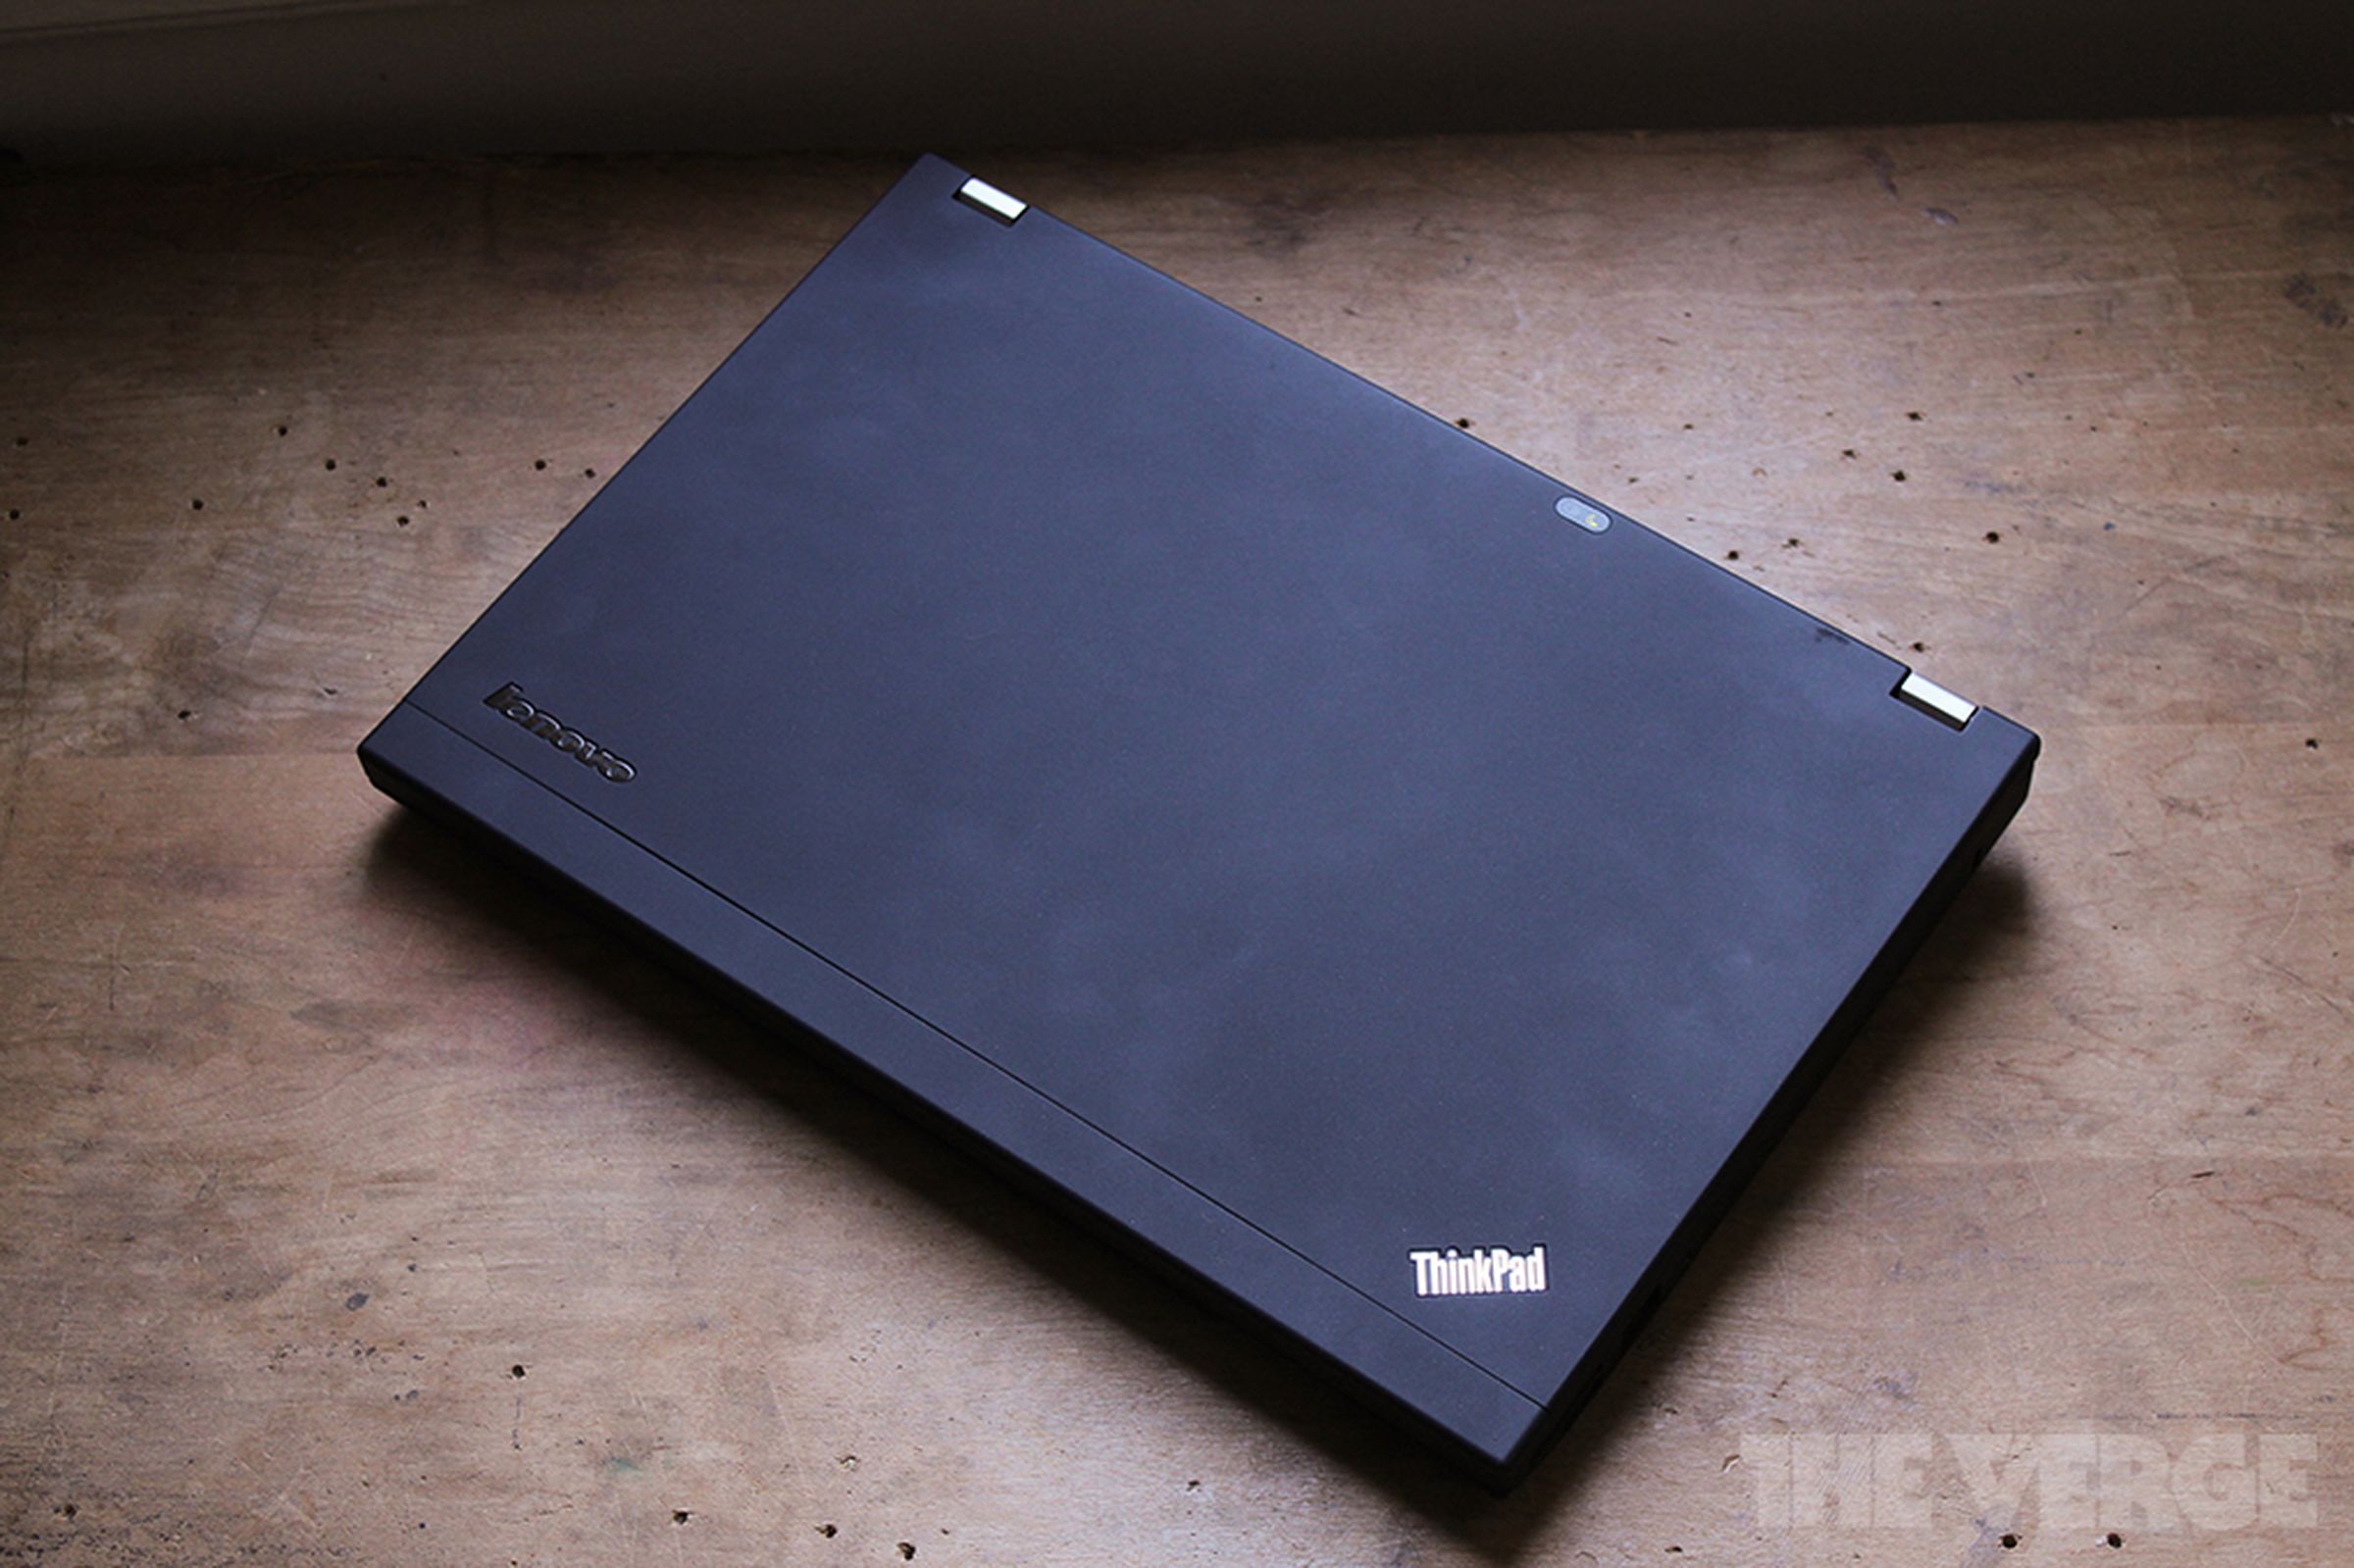 Lenovo ThinkPad X230 review pictures